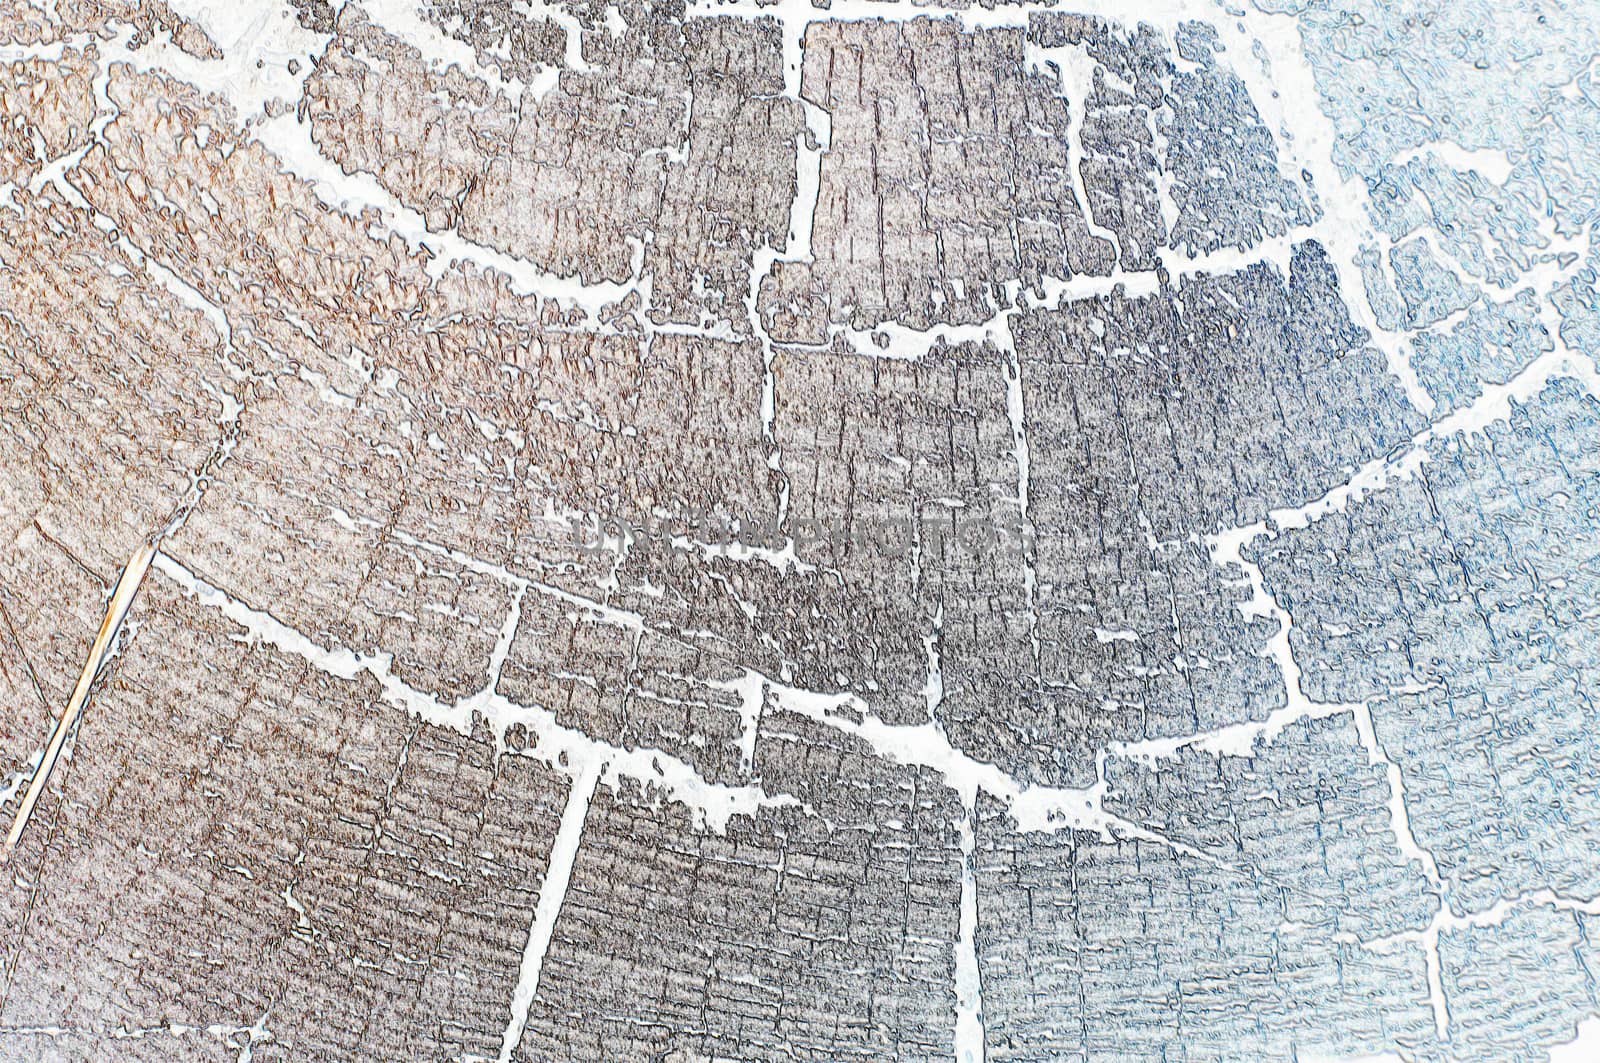 close-up wooden cut texture. For your commercial and editorial use.